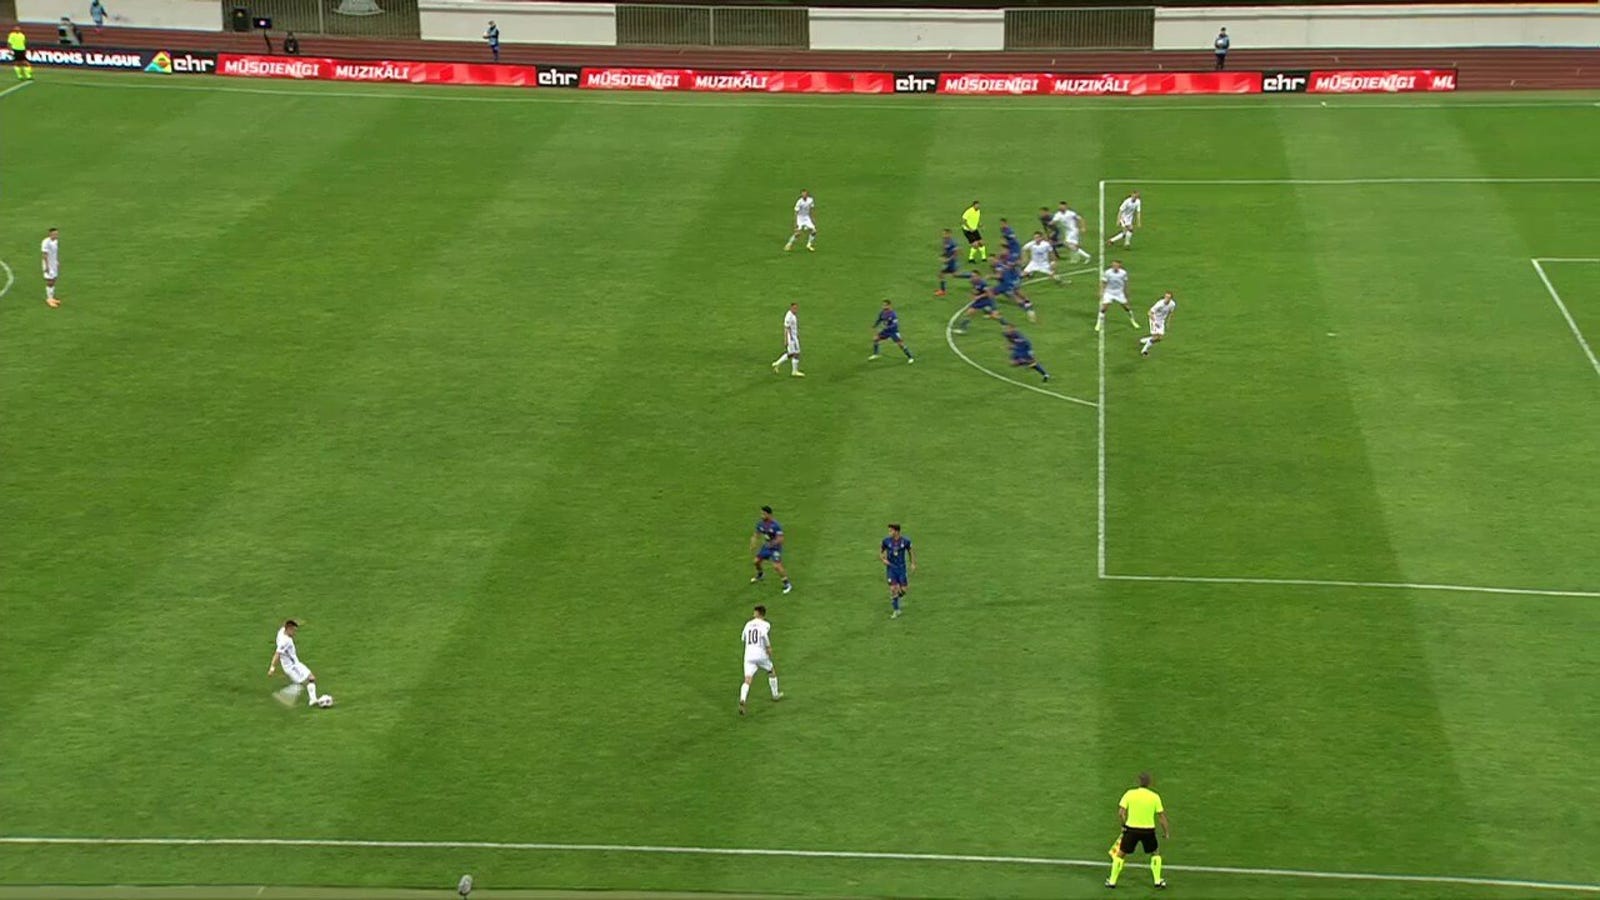 Offside trap from Andorra backfires after Roberts Uldriķis times it perfectly, 2-0